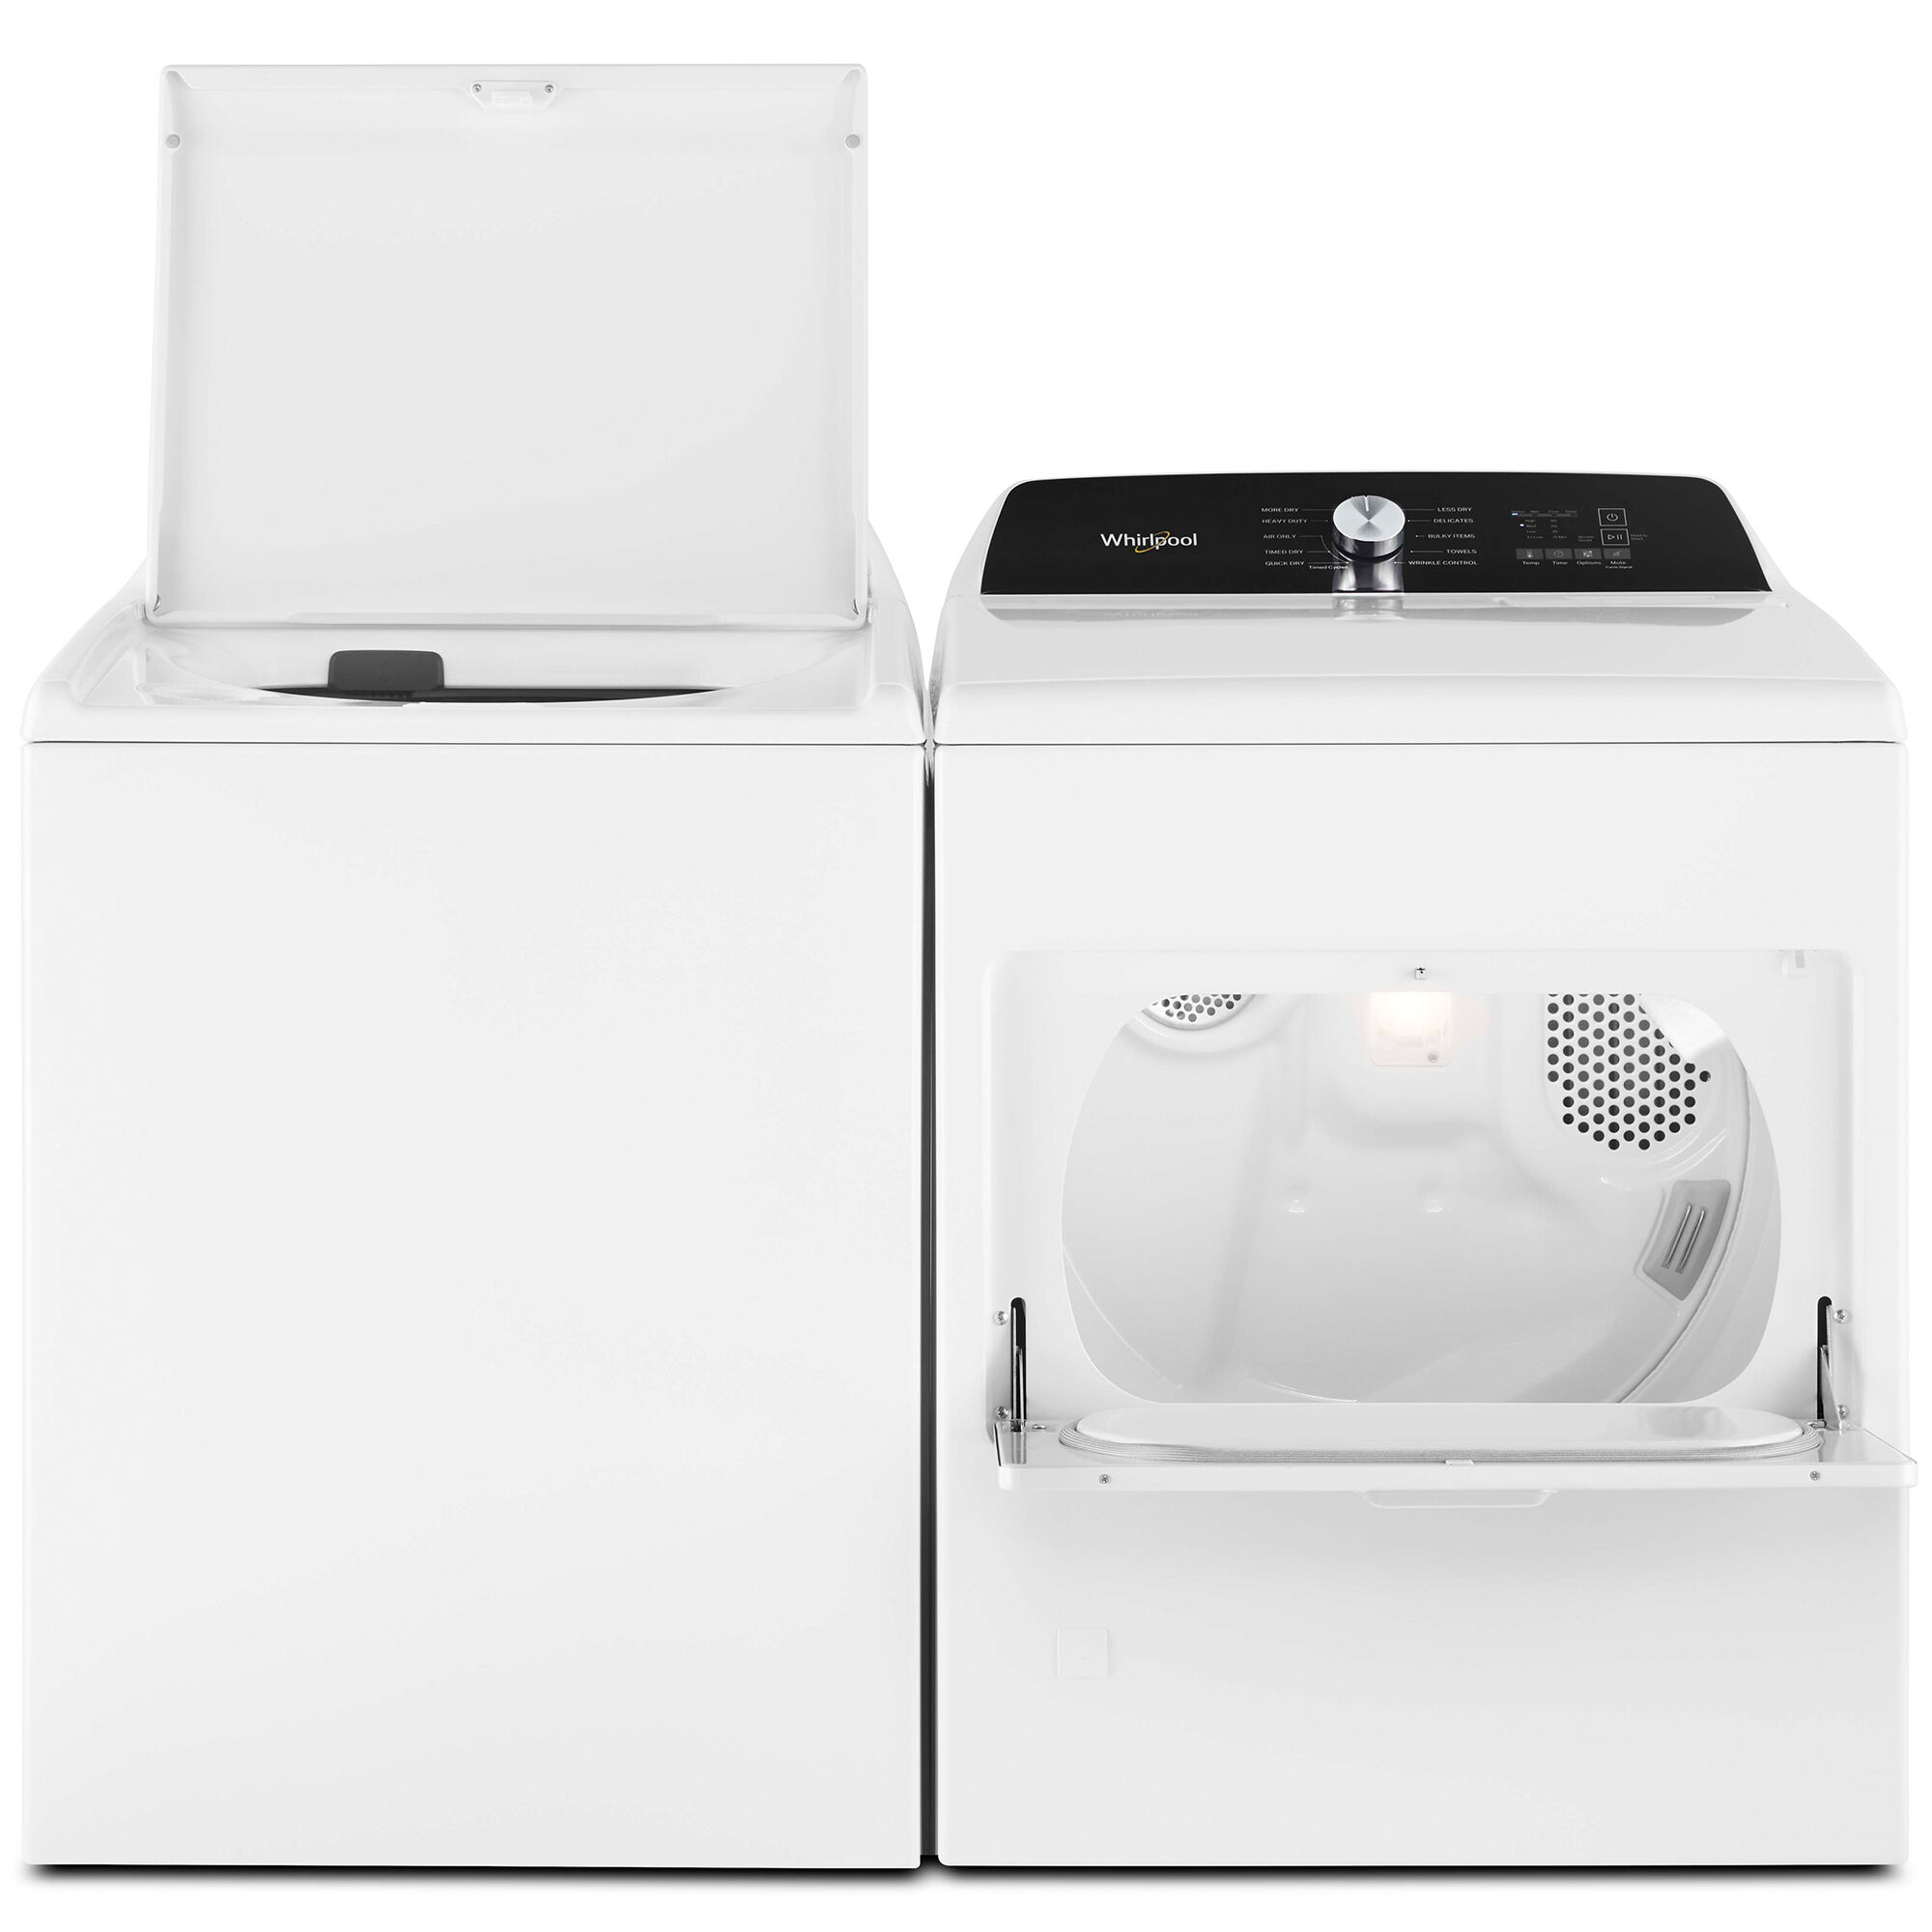 Whirlpool 29 in. 7.0 cu. ft. Top Loading Electric Dryer with 11 Dryer  Programs, 1 Dry Options, Wrinkle Care & Sensor Dry - White